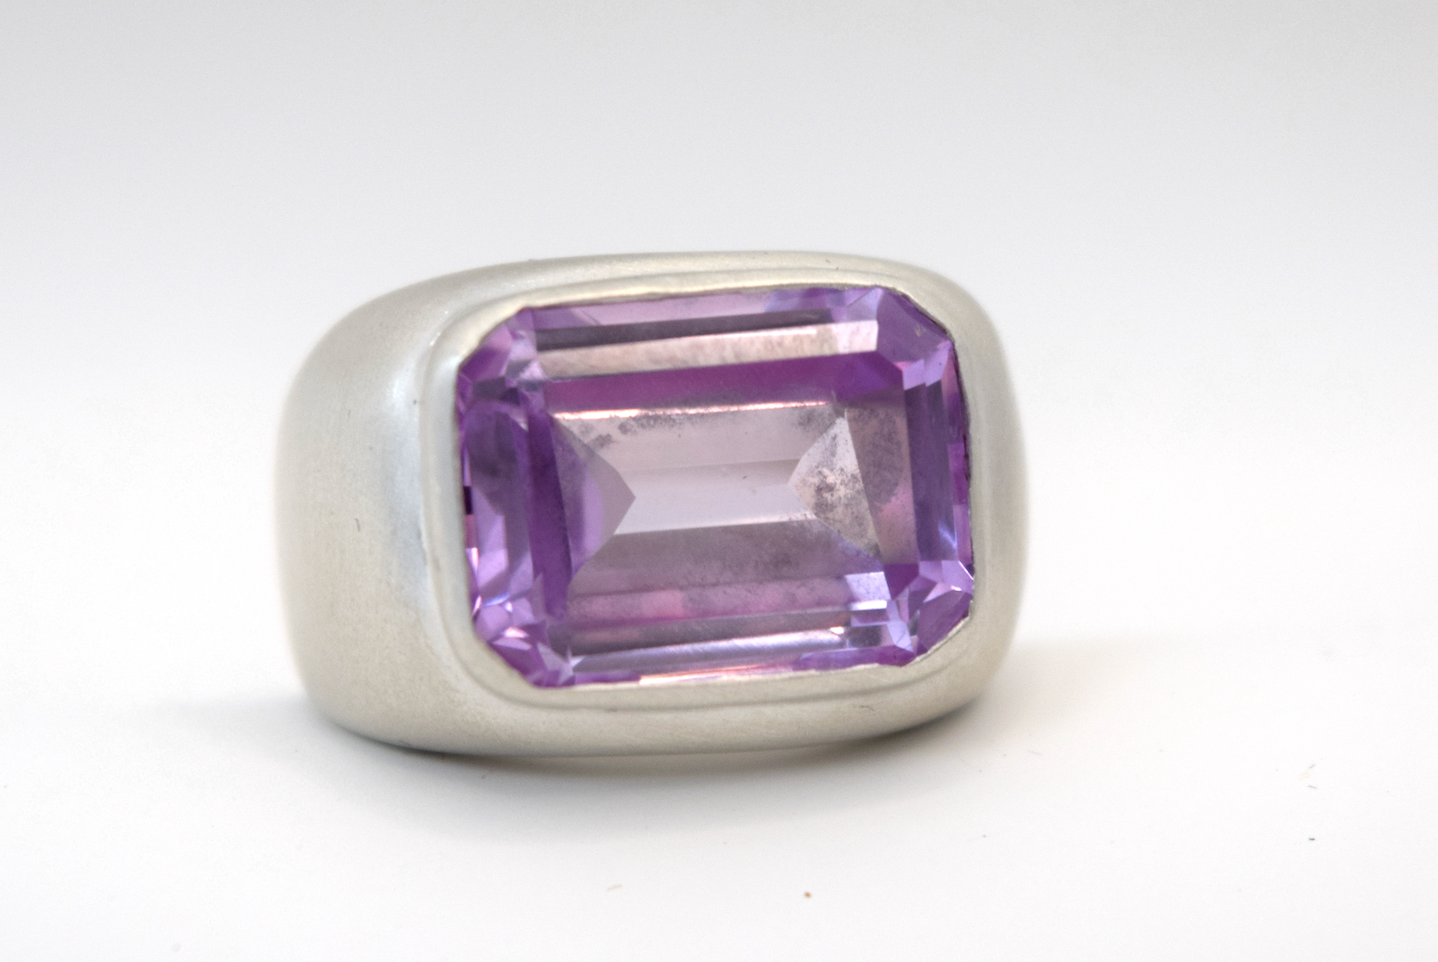 The Princess Annabelle Ring in Amethyst and Solid Sterling Silver with Satin Finish